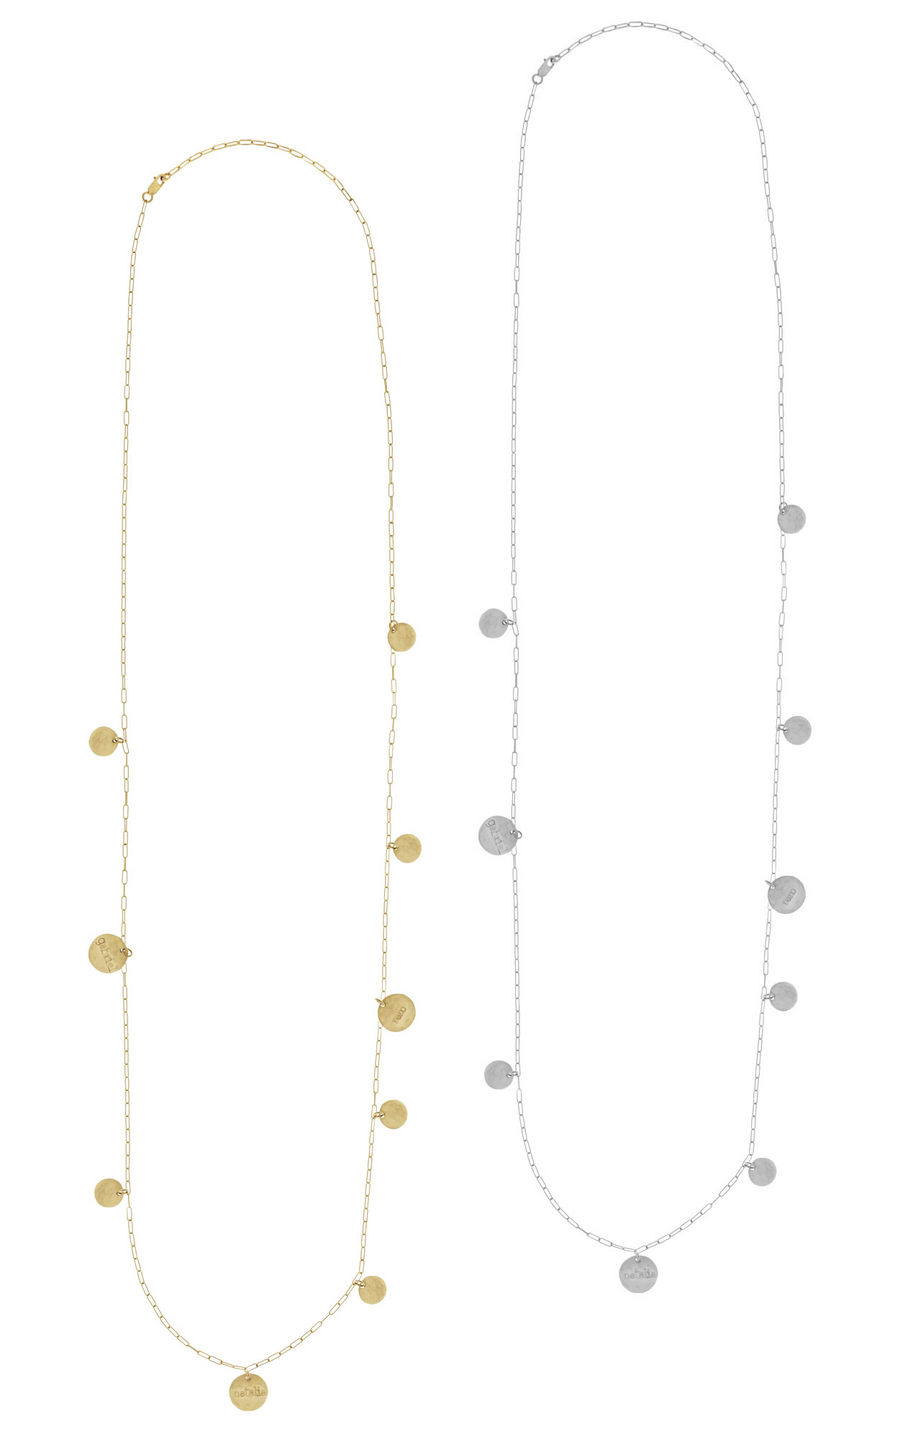 The Cara Long Hammered Disc Necklace in Gold, Silver